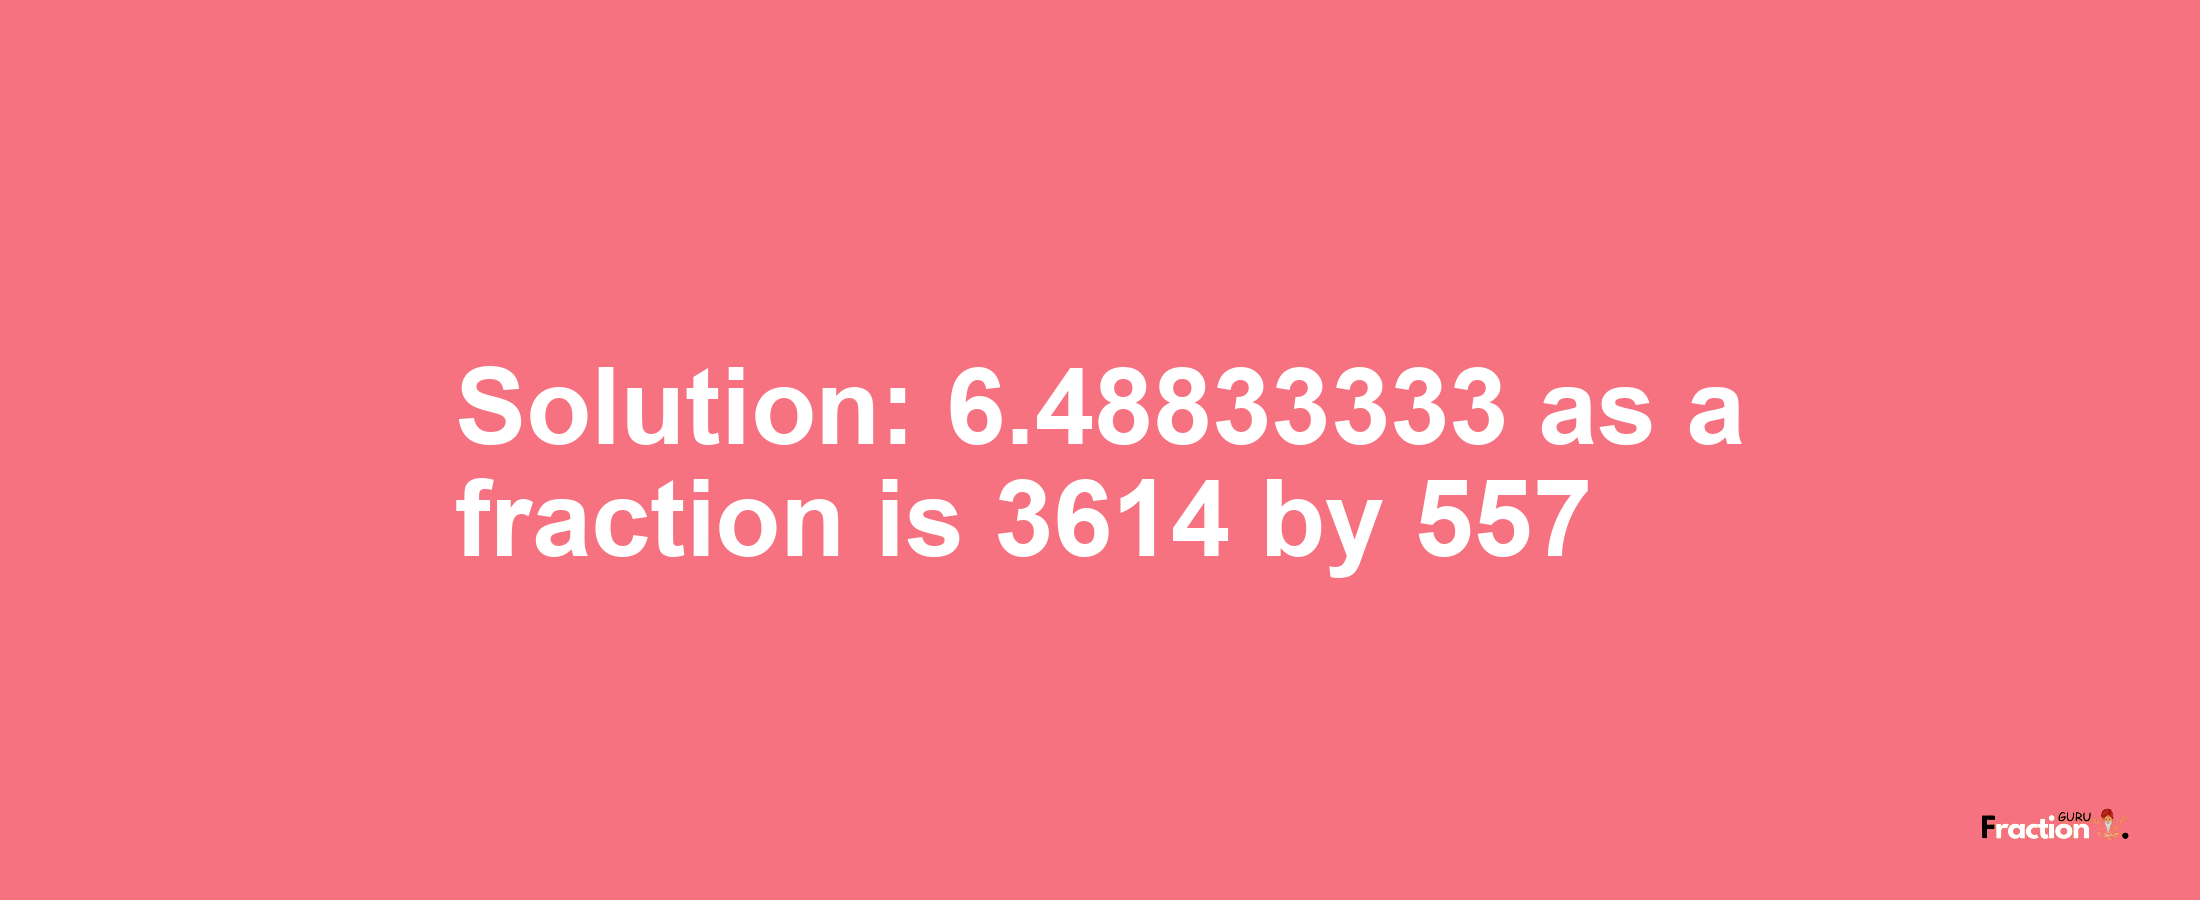 Solution:6.48833333 as a fraction is 3614/557